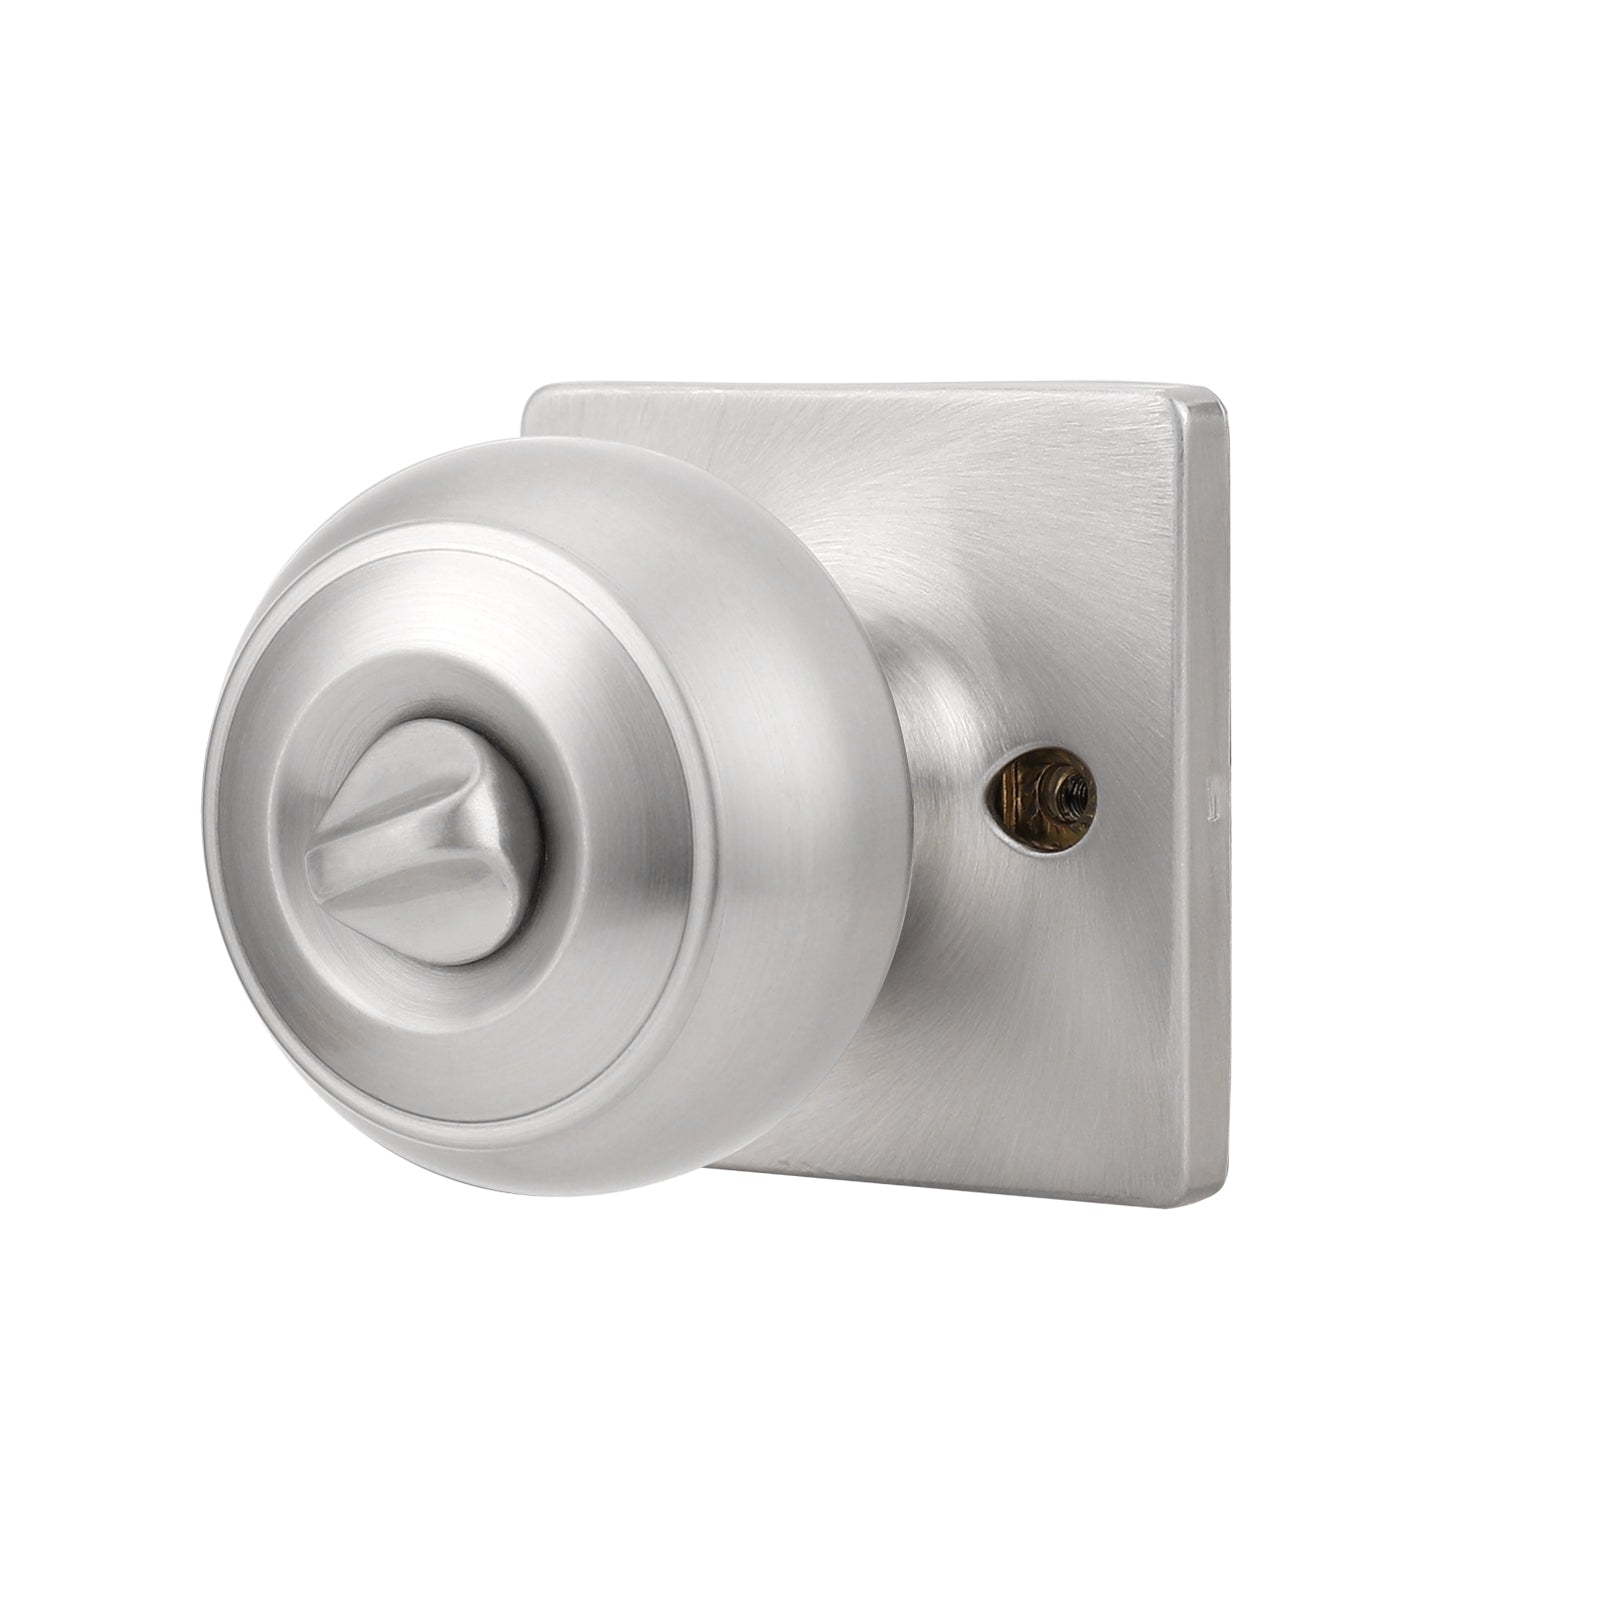 Flat Ball Knob with Square Rosette, Interior Privacy Door Knobs Stain Nickel DLS09SNBK - Probrico